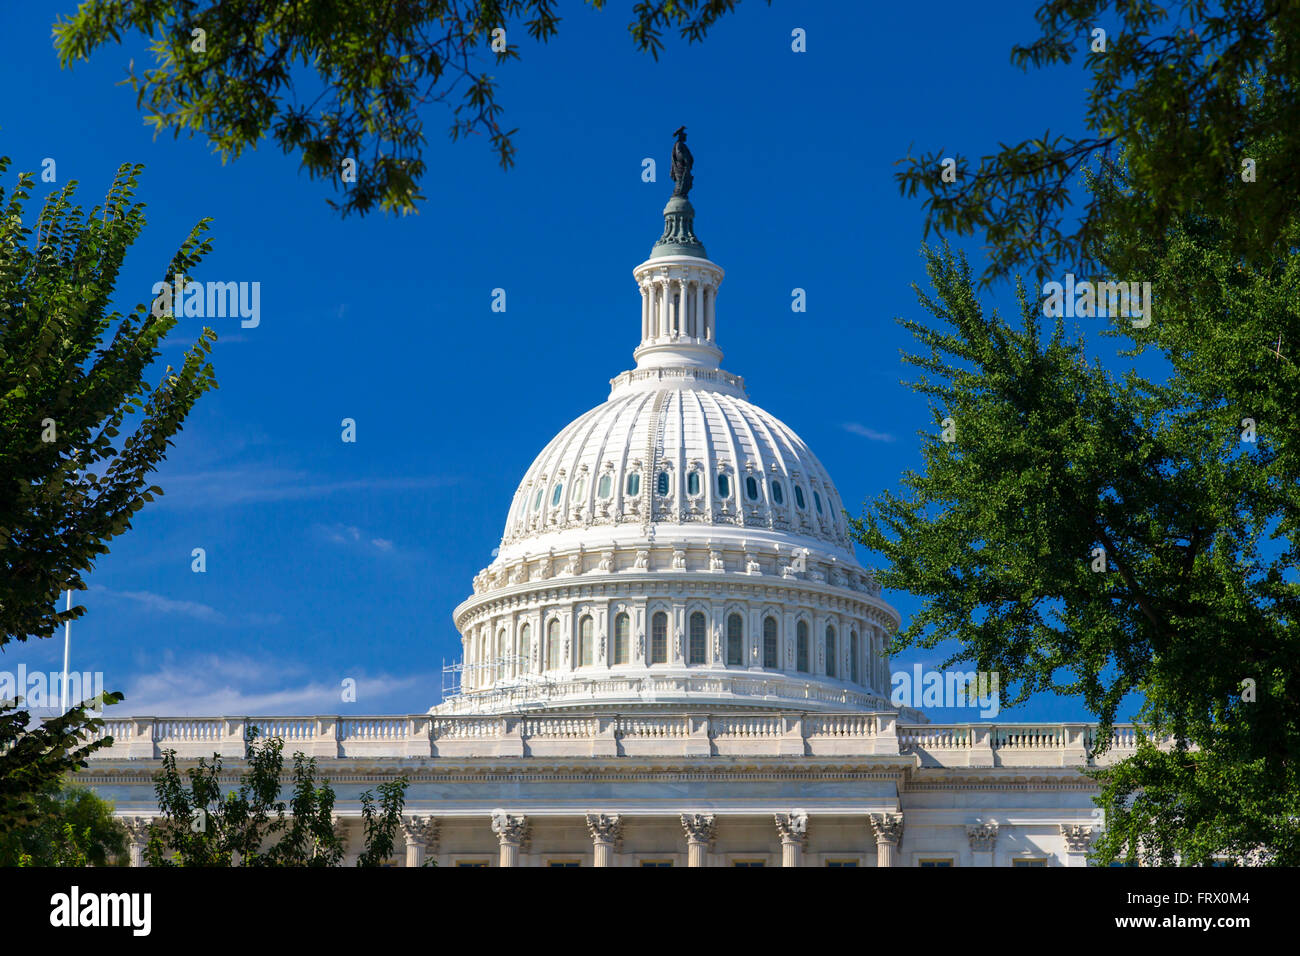 Close-up of the Dome of the United States National Capitol building in Washington DC Stock Photo